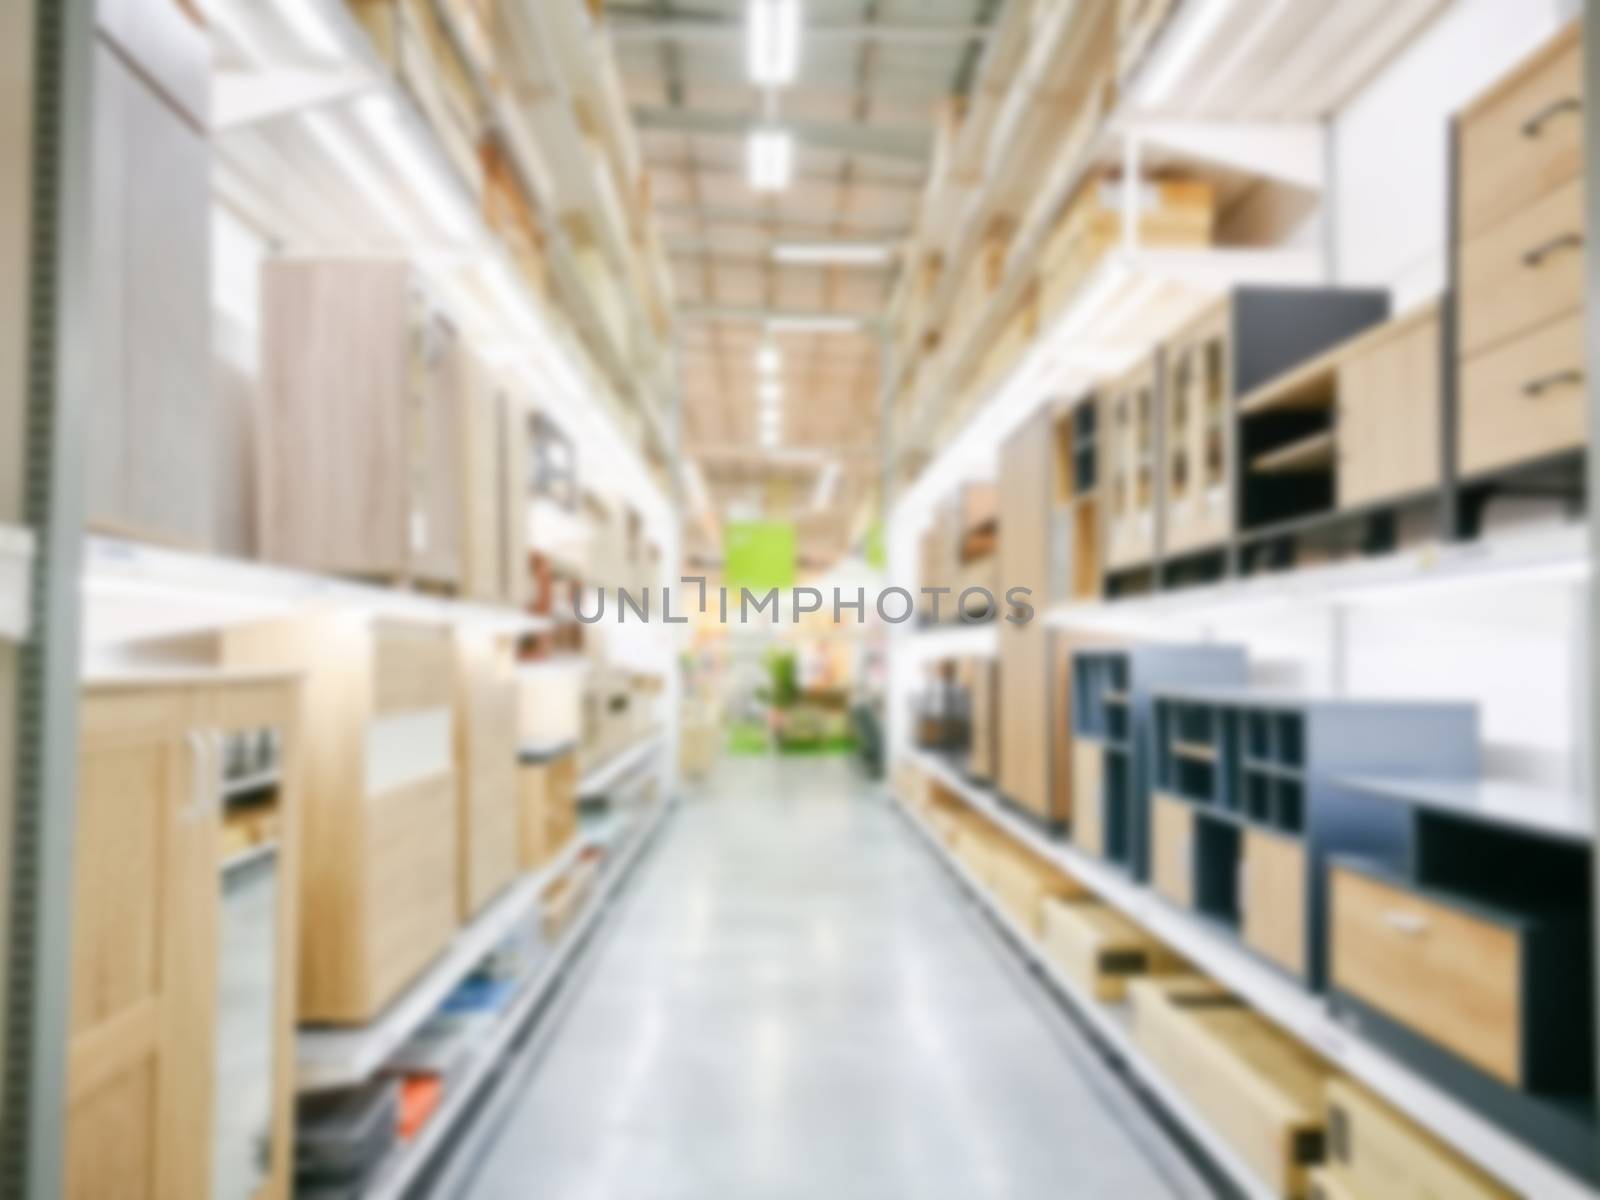 Blur furniture store interior for background. blurry industrial furniture merchandise inventory and wood material.